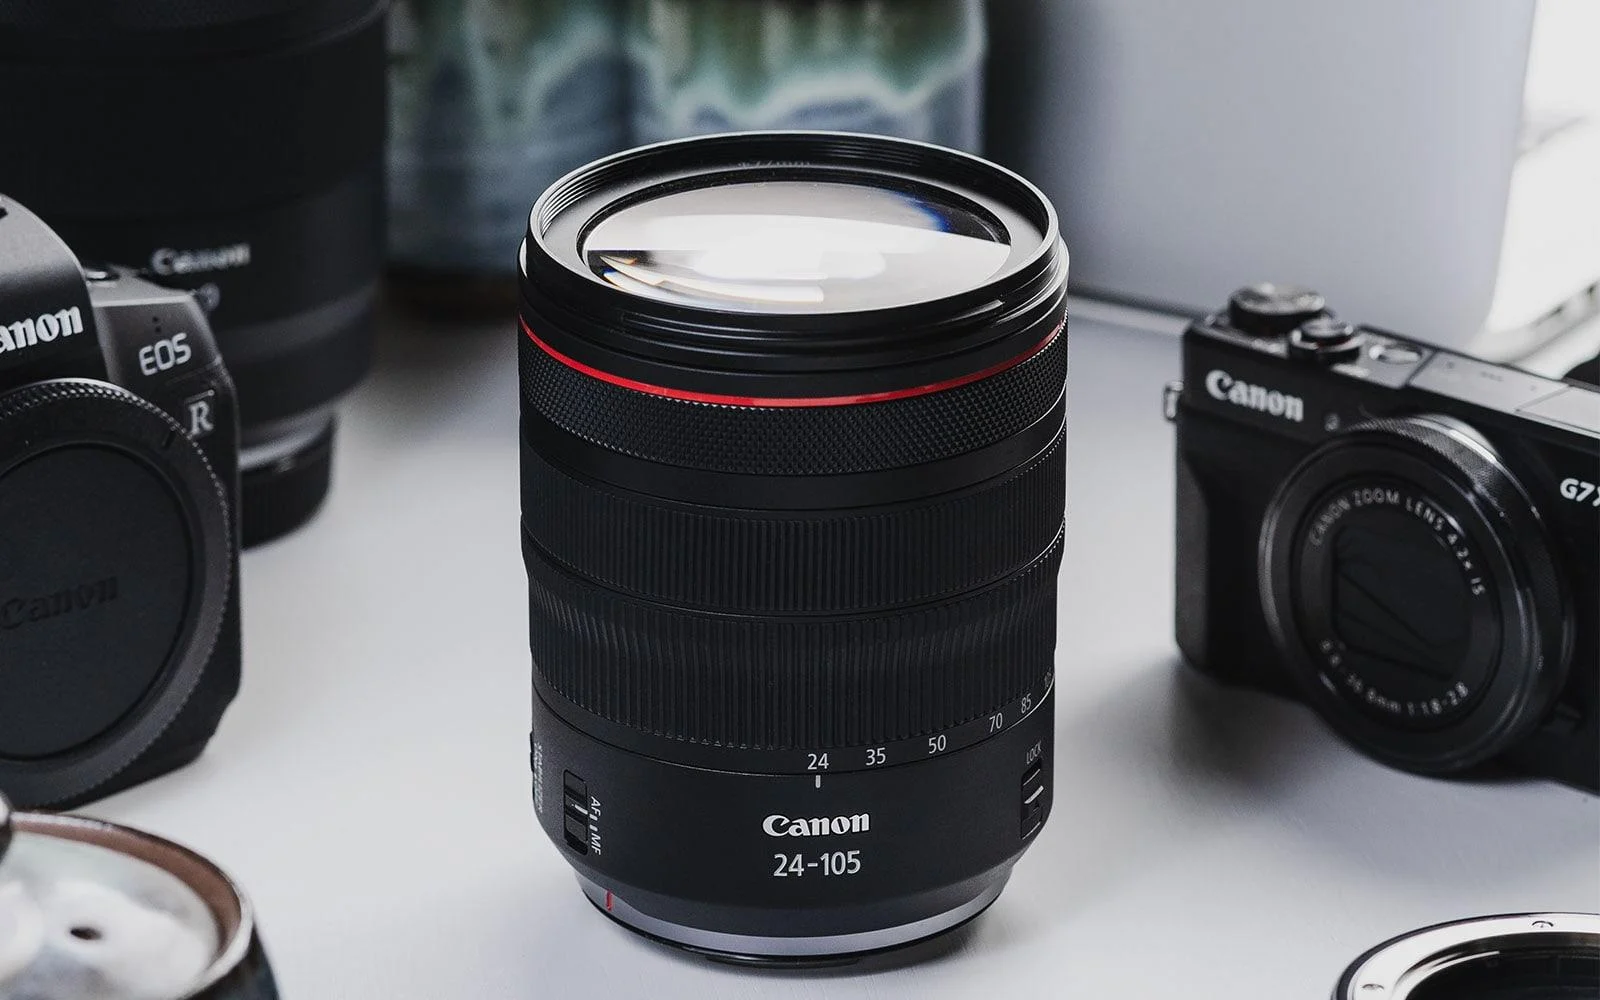 Canon plans to more than double its RF mirrorless lens lineup by 2025